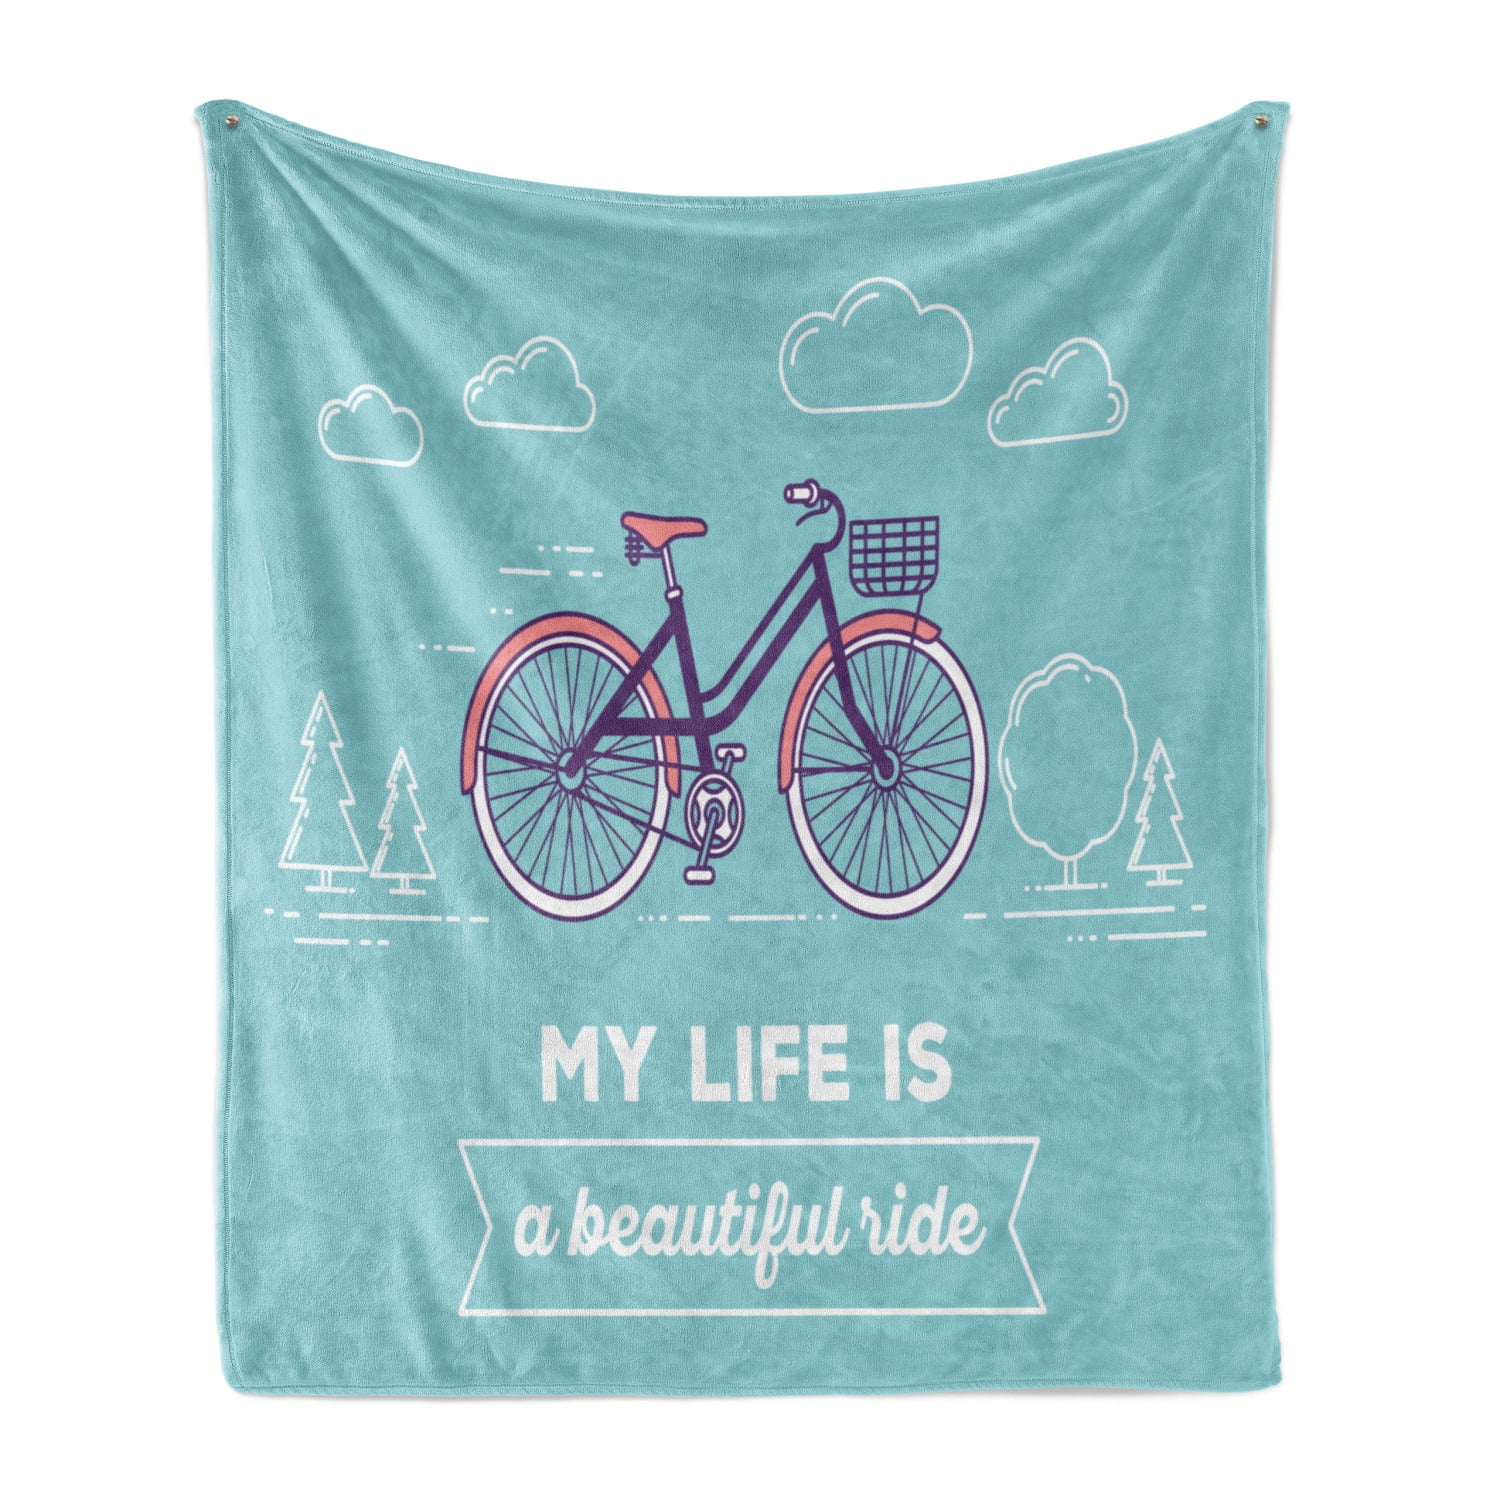 50 x 60 Cozy Plush for Indoor and Outdoor Use Ambesonne Saying Soft Flannel Fleece Throw Blanket Pale Blue Dark Purple Retro Pastel Bike with Basket and Text My Life is a Ride 